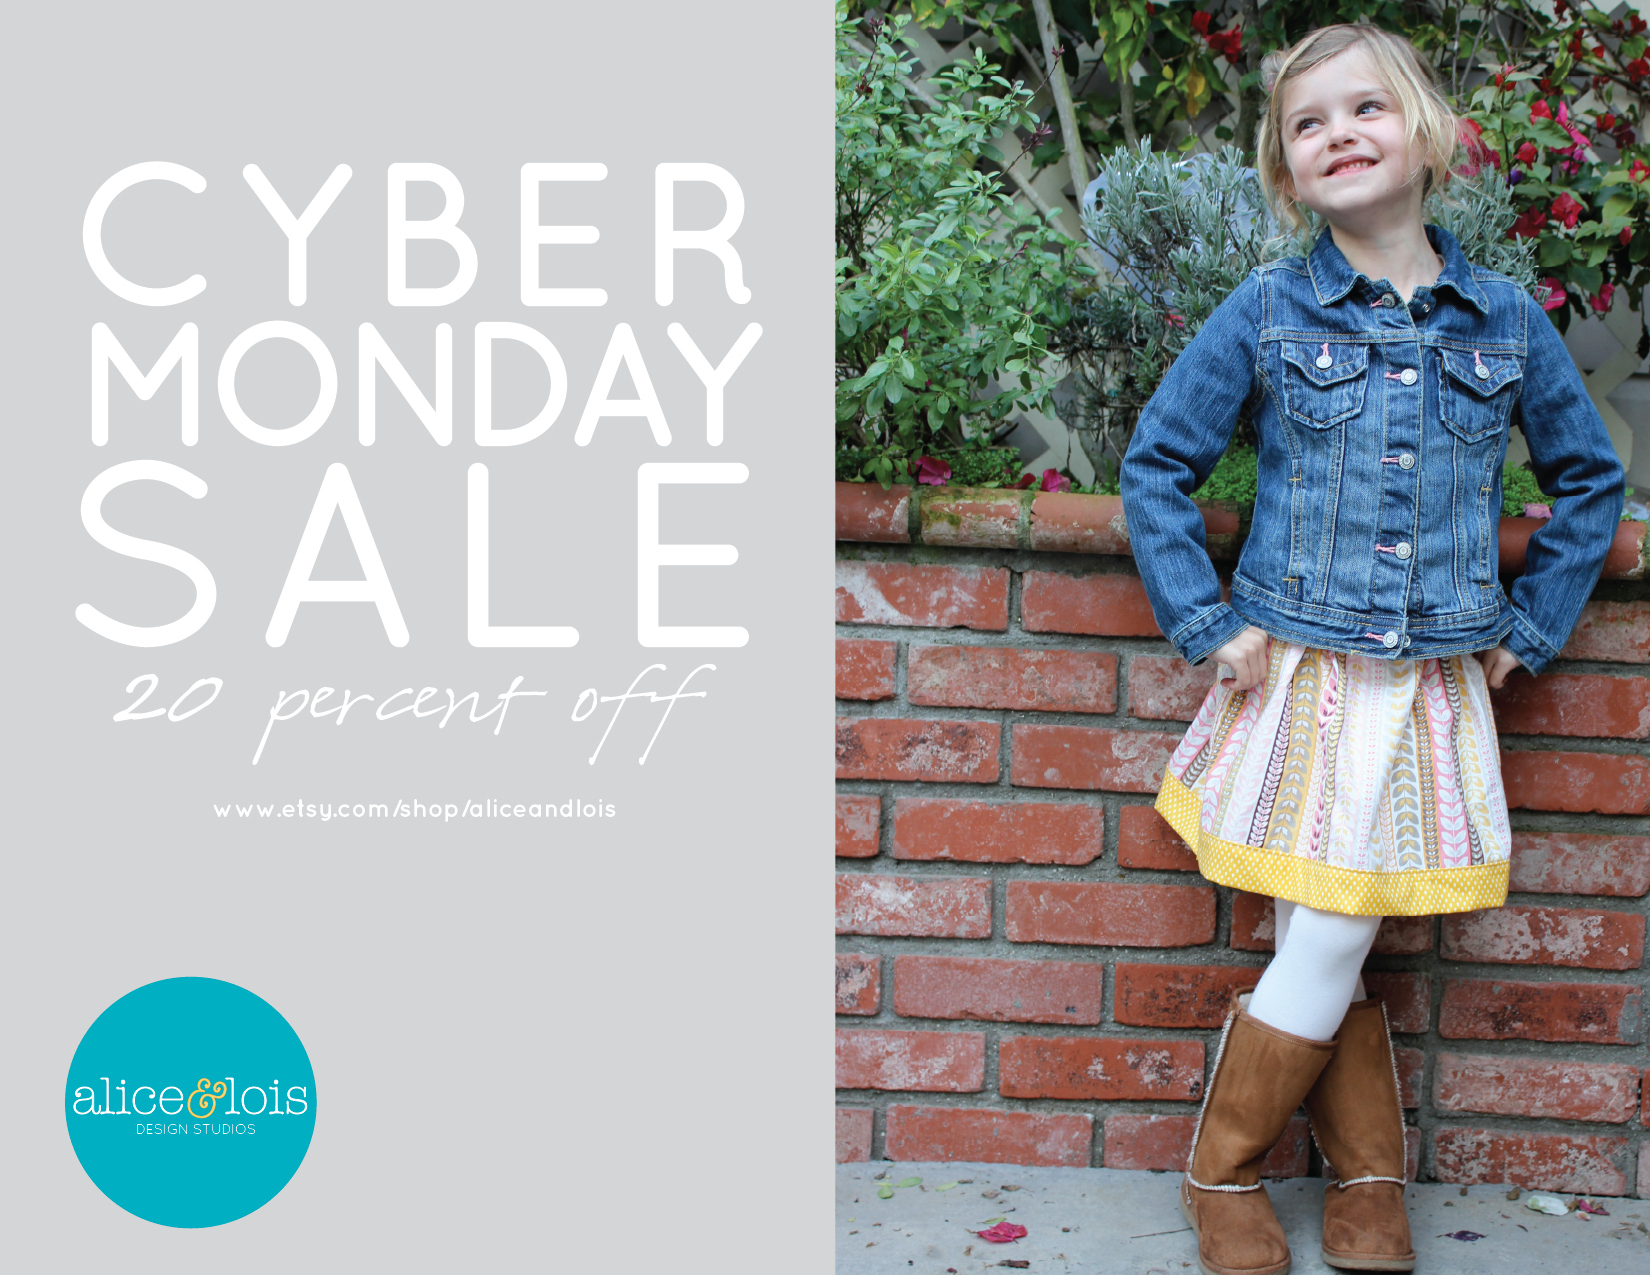 Cyber Monday Sale at our Etsy shop